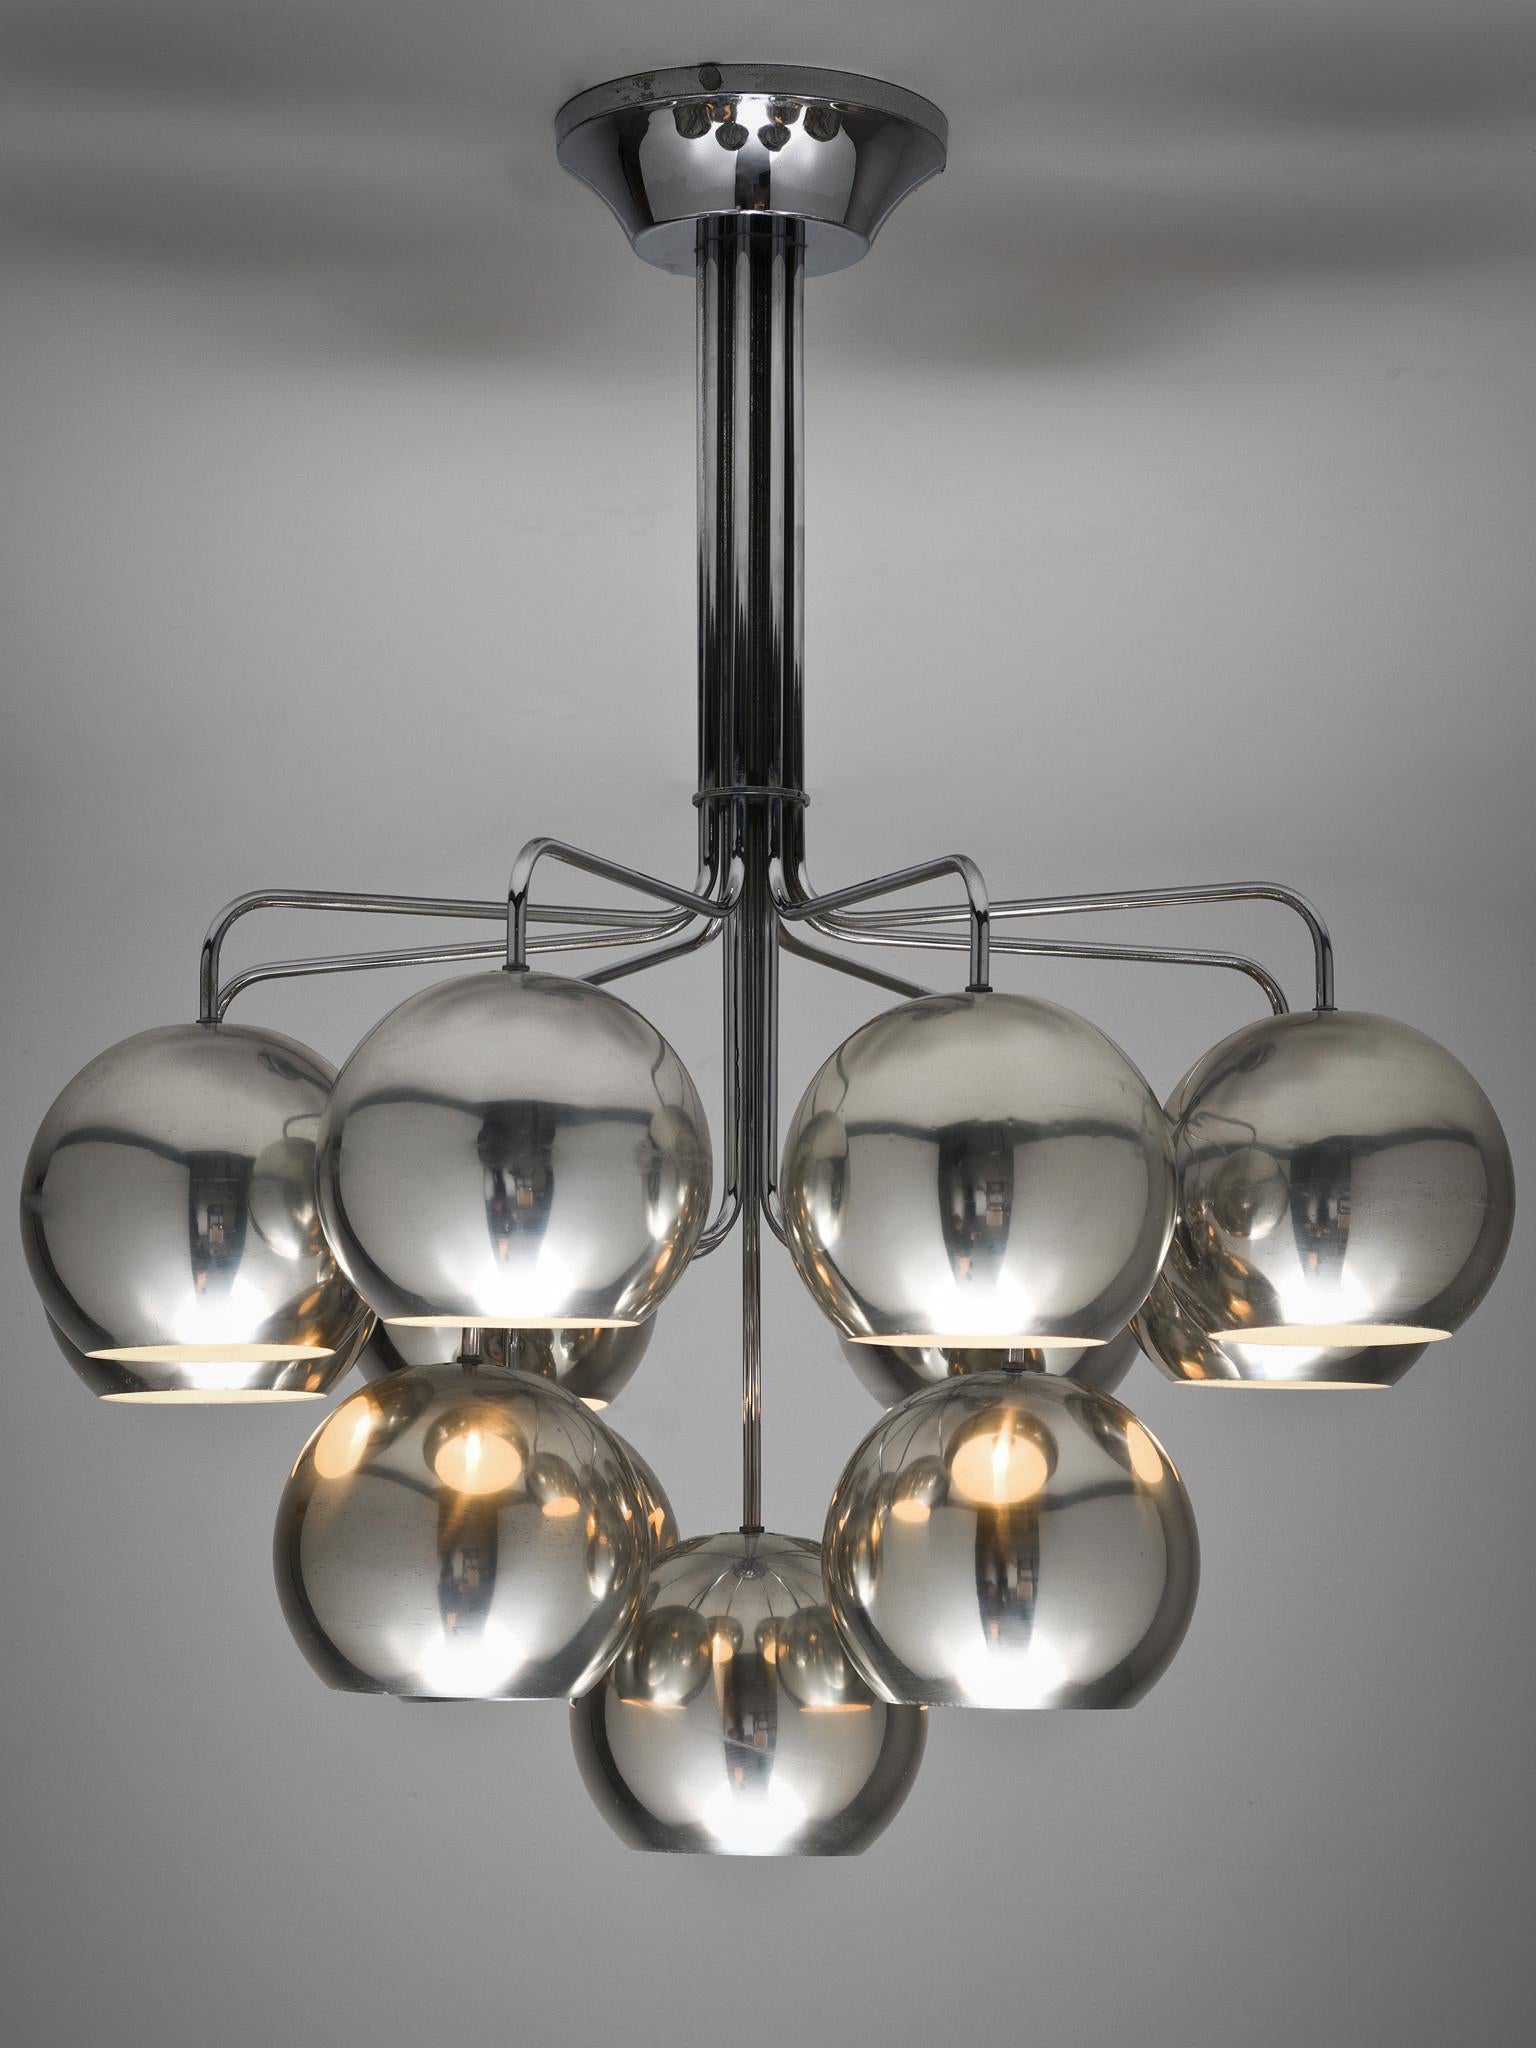 Chrome pendant, Germany, 1970.

This chrome pendant is wonderfully stately and at the same time minimalistic in design. The color of the chrome is muted and light to almost green on the inside. The vertical rod that holds all the chrome balls